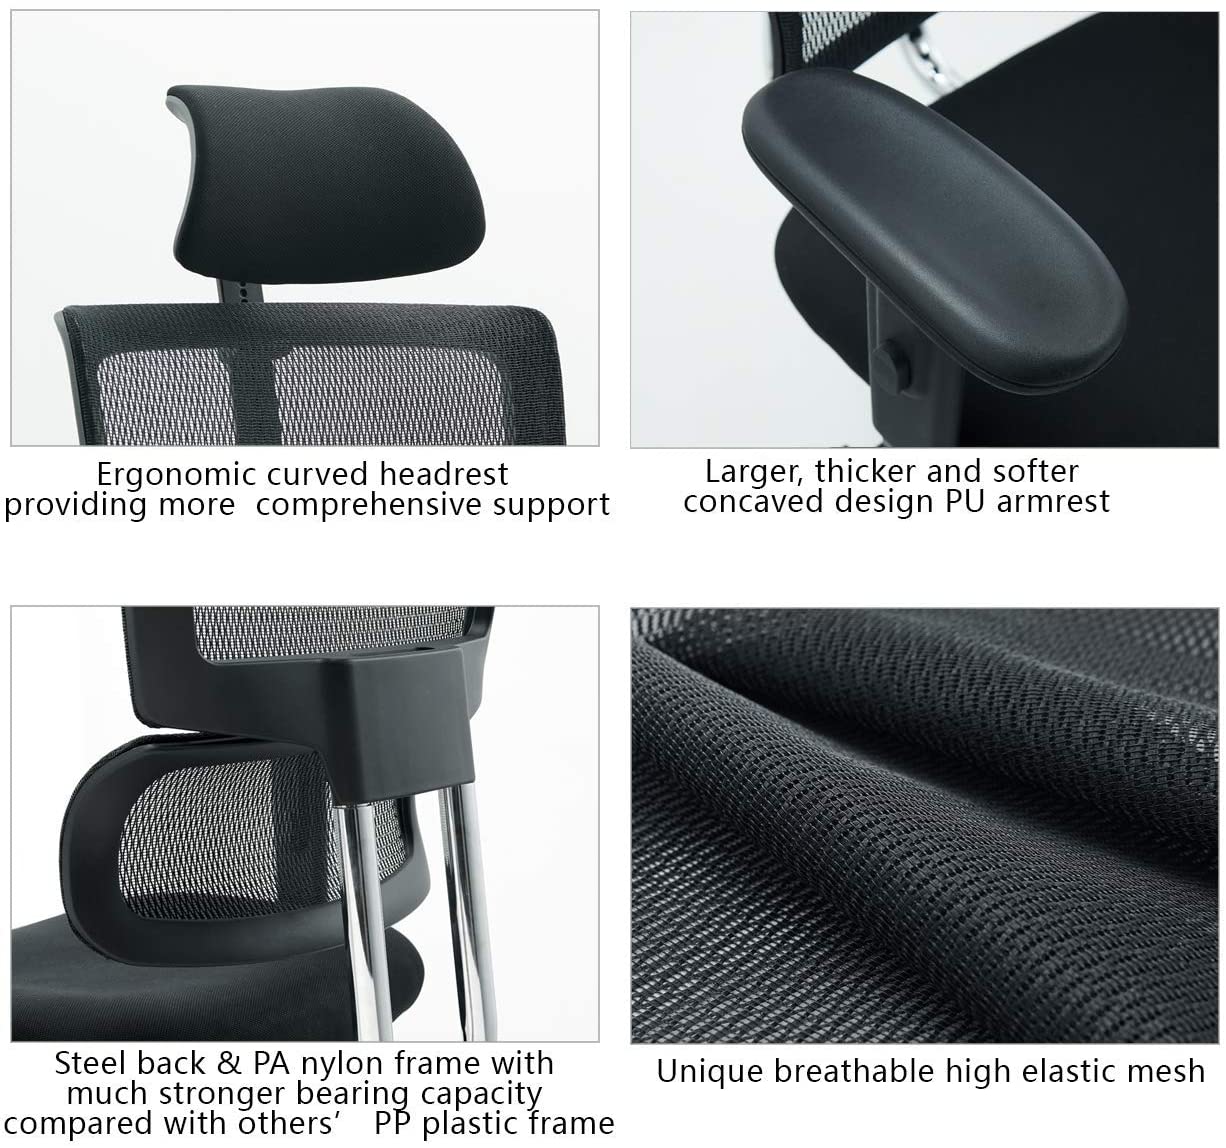 Ticova Ergonomic Office Chair - High Back Desk Chair with Elastic Lumbar Support & Thick Seat Cushion - 140°Reclining & Rocking Mesh Computer Chair with Adjustable Headrest, Armrest - image 4 of 5